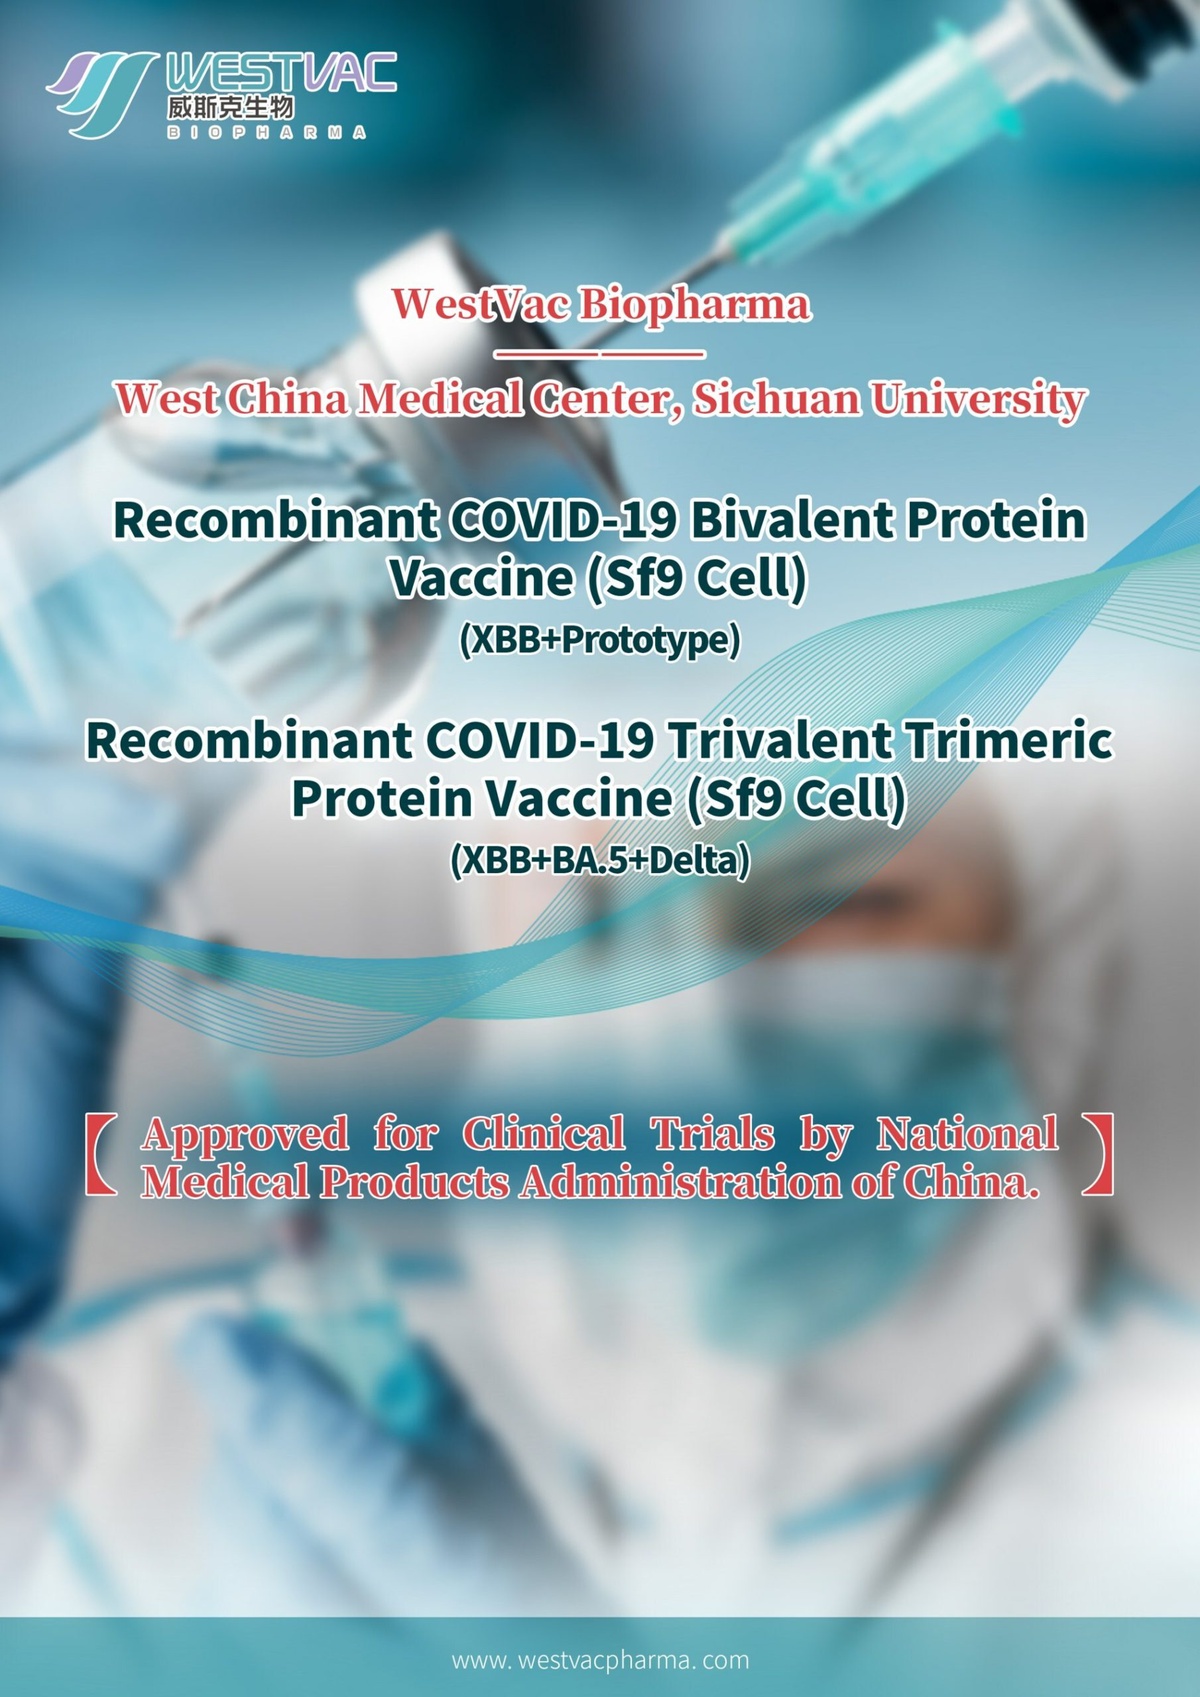 The First of Its Kind in the World: The Recombinant Multivalent COVID-19 Protein Vaccine against XBB Variants by WestVac Biopharma/West China Medical Center, Sichuan University has been Approved for